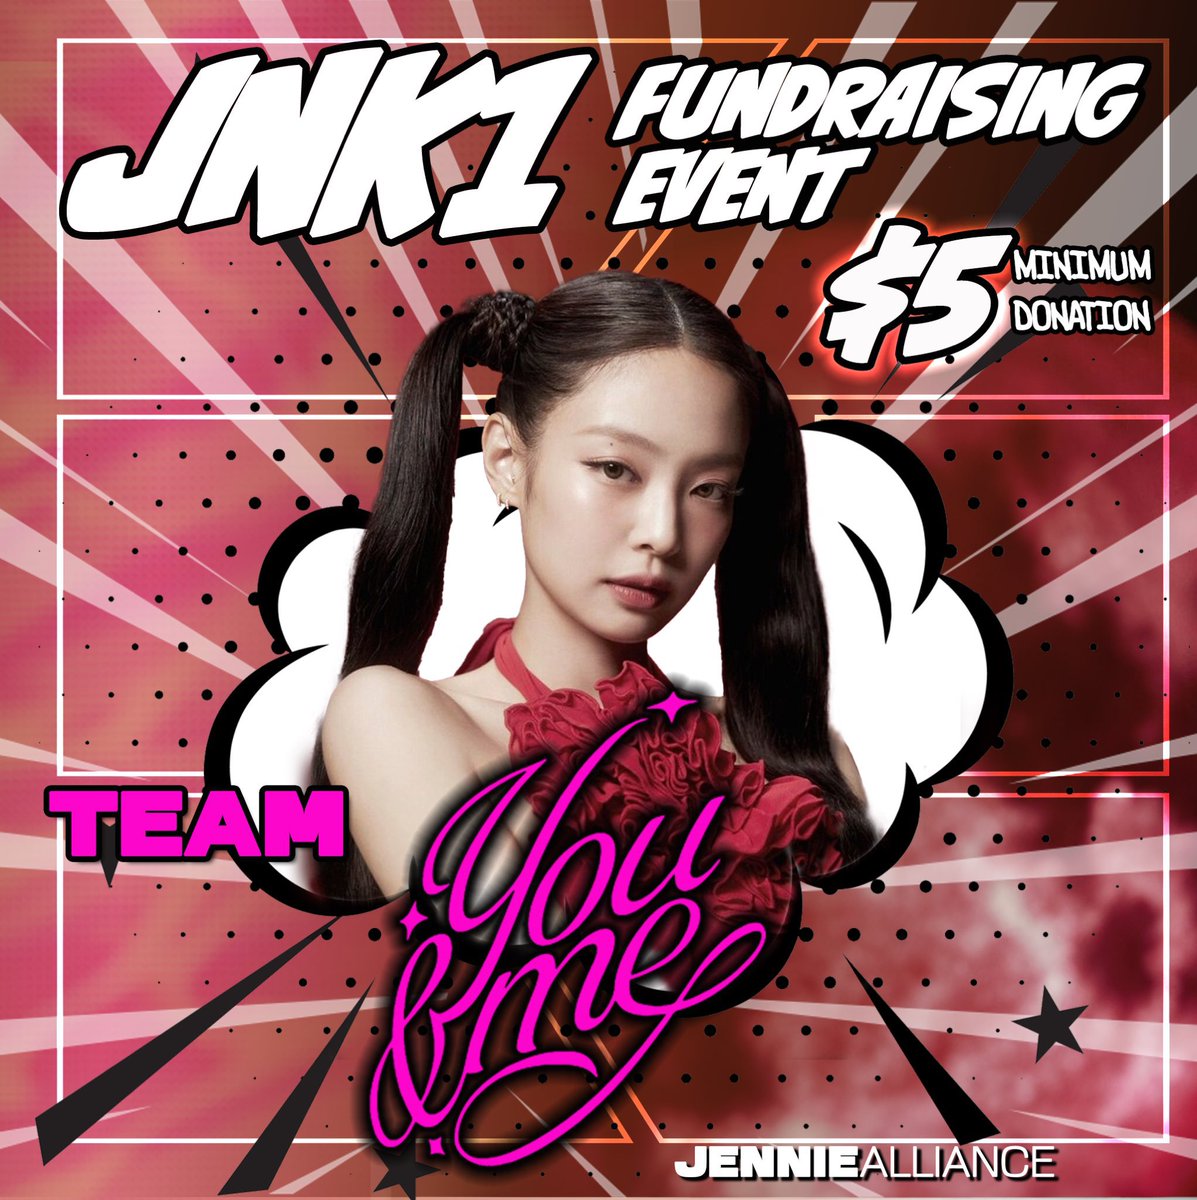 [#JNK1 FUNDRAISING EVENT!] TEAM #YOUANDME are you ready?! 🌕💃🏻 Please join us now for this Donation Battle against @USBU4WAYS by donating to our #JENNIE USA Digital Buying Fund! Donation Link: ➝ bit.ly/JNK1USSTFund #JNK1USAFundraisingEvent #TeamYOUANDME